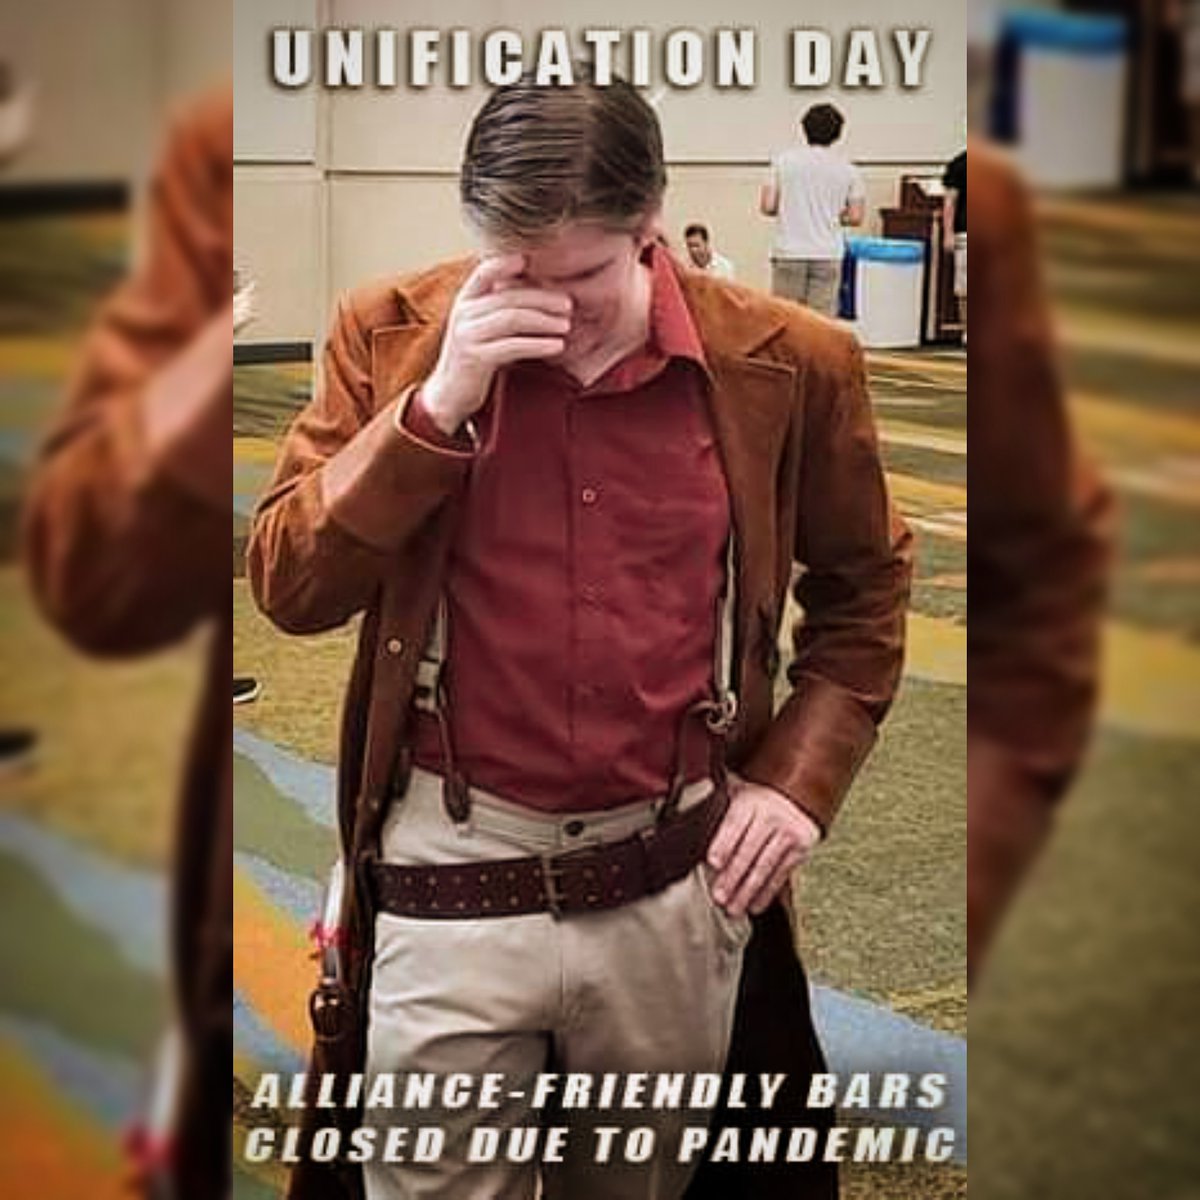 What's a Browncoat supposed to do...
...
...
...
#firefly #browncoat #fireflycosplay #cosplay #cosplayersofinstagram #cosplayguy #captainmalcolmreynolds #captainmal #serenity #malcolmreynolds #captainmalcosplay #over30cosplay #over40cosplay #bigdamnheroes #josswhedon